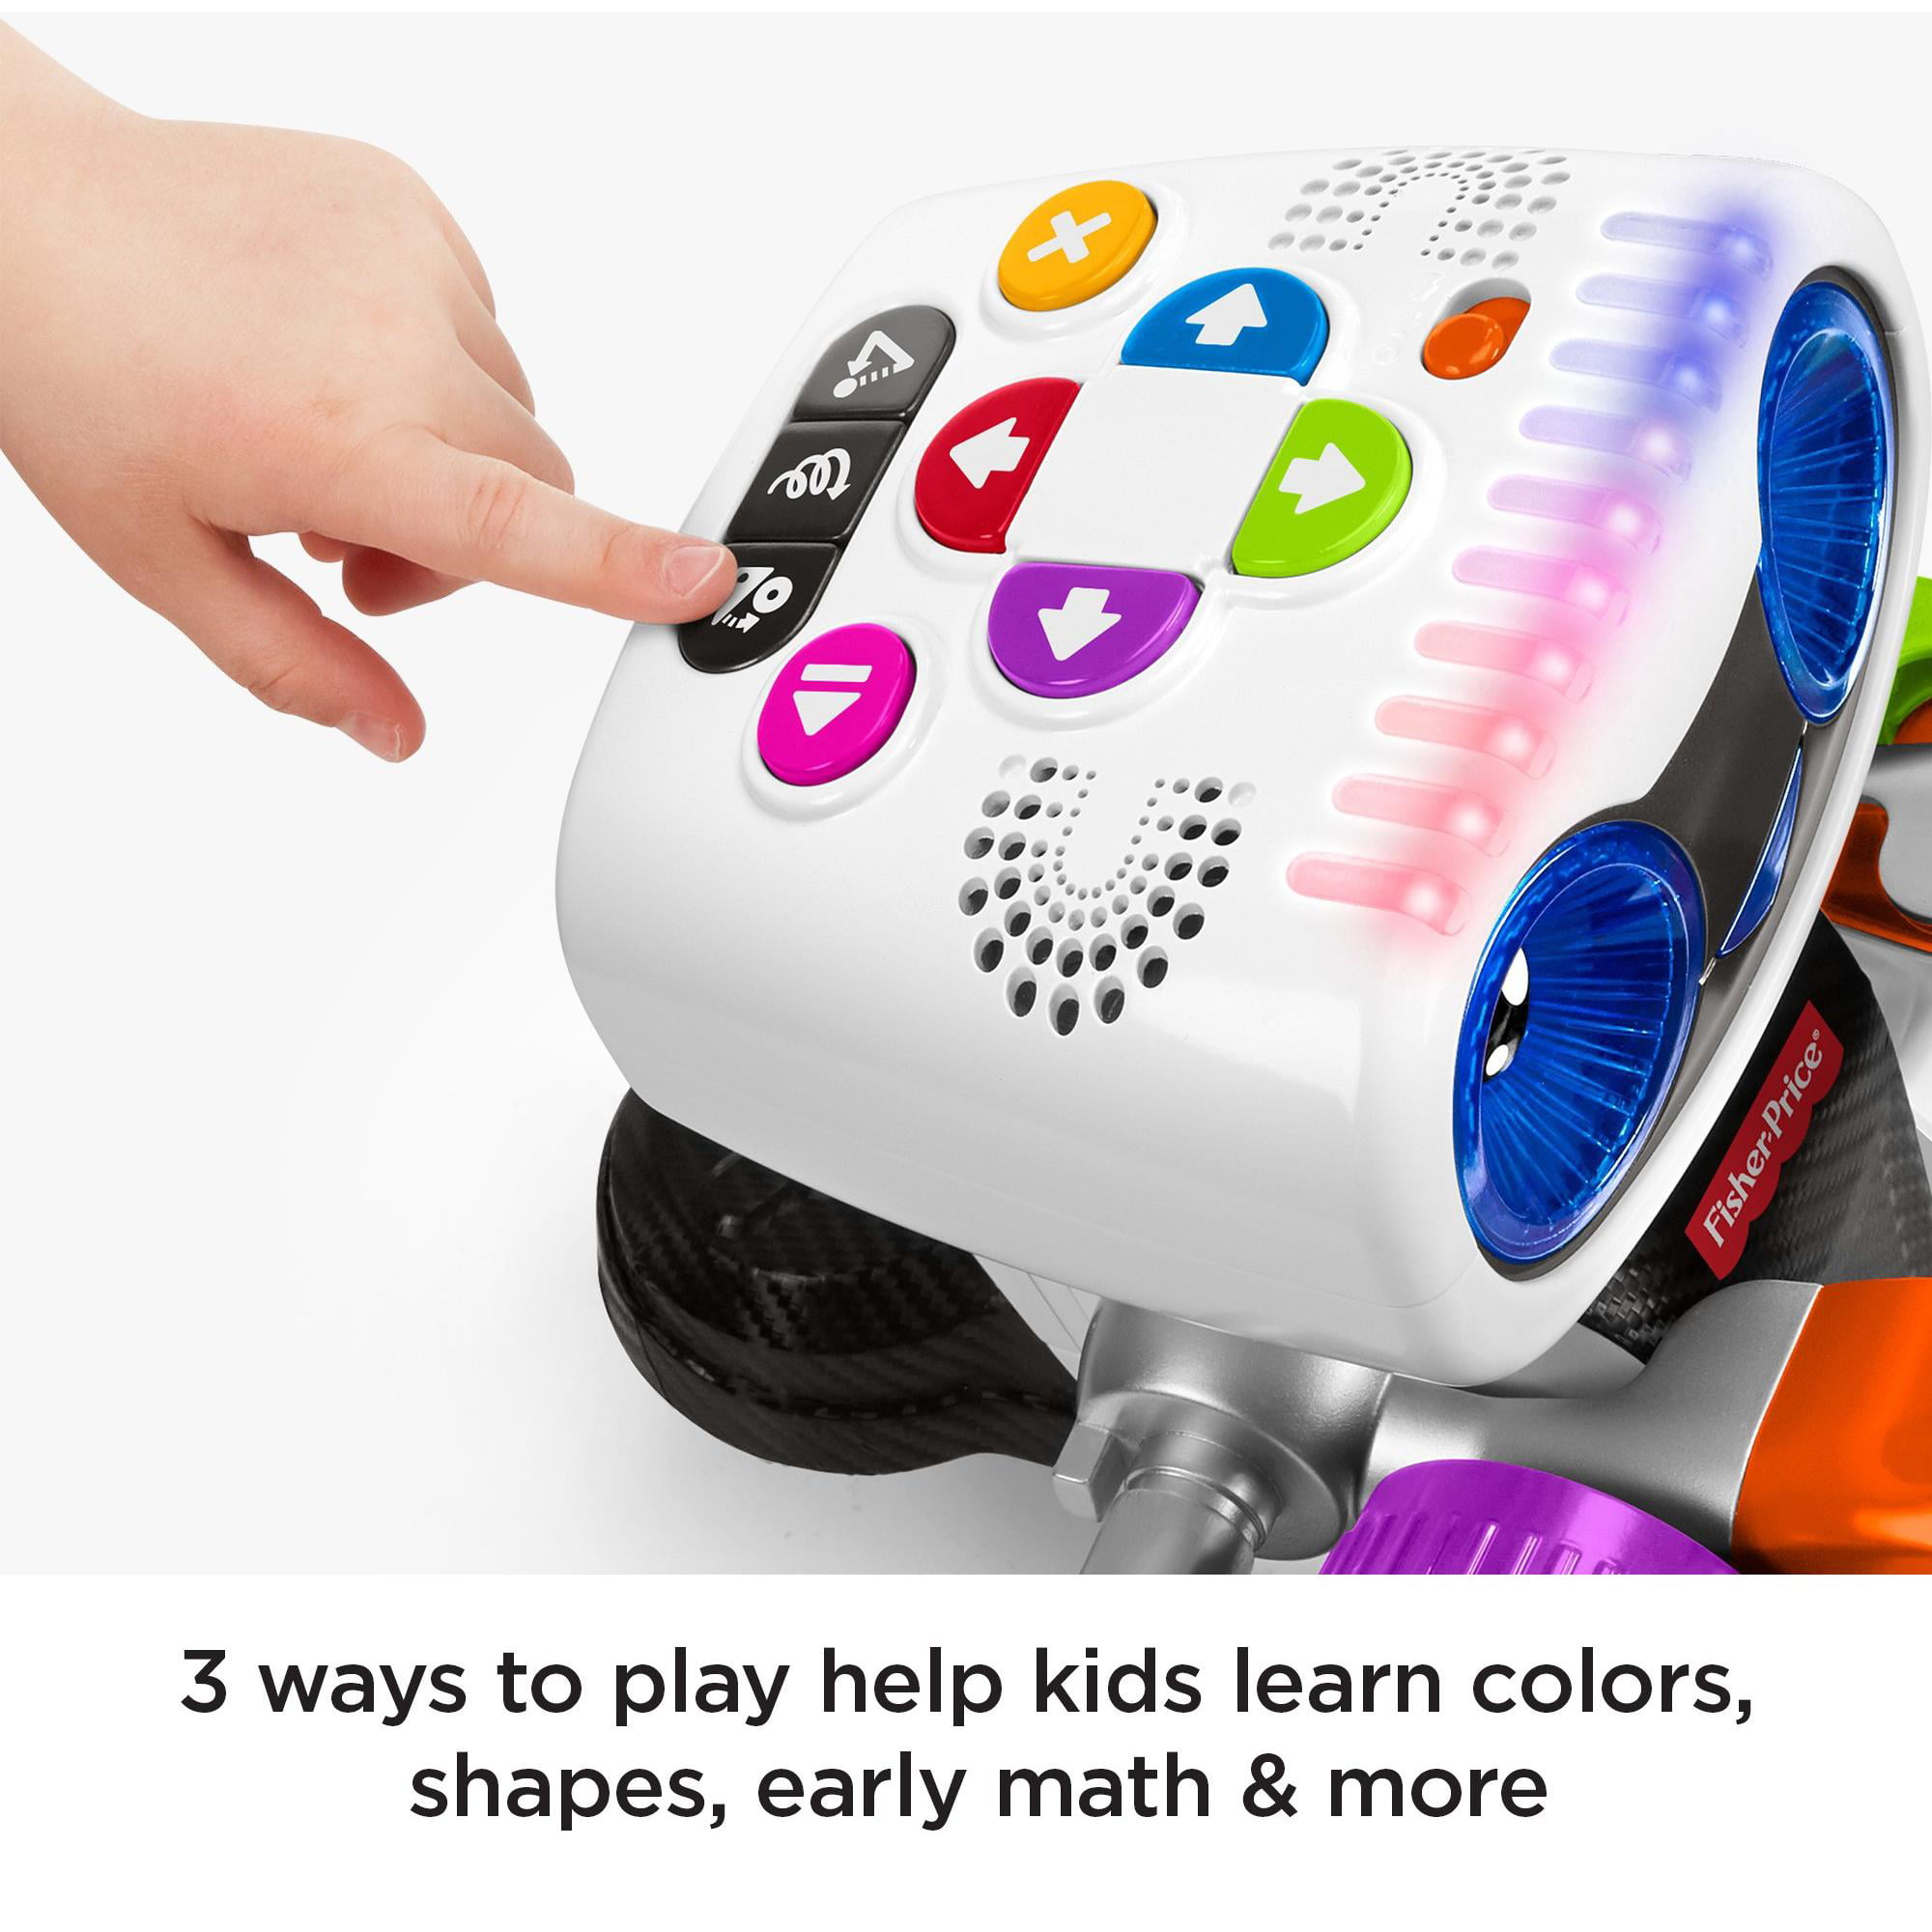 Fisher-Price FXG15 Code 'n Interactive Learning Kinderbot for sale online 